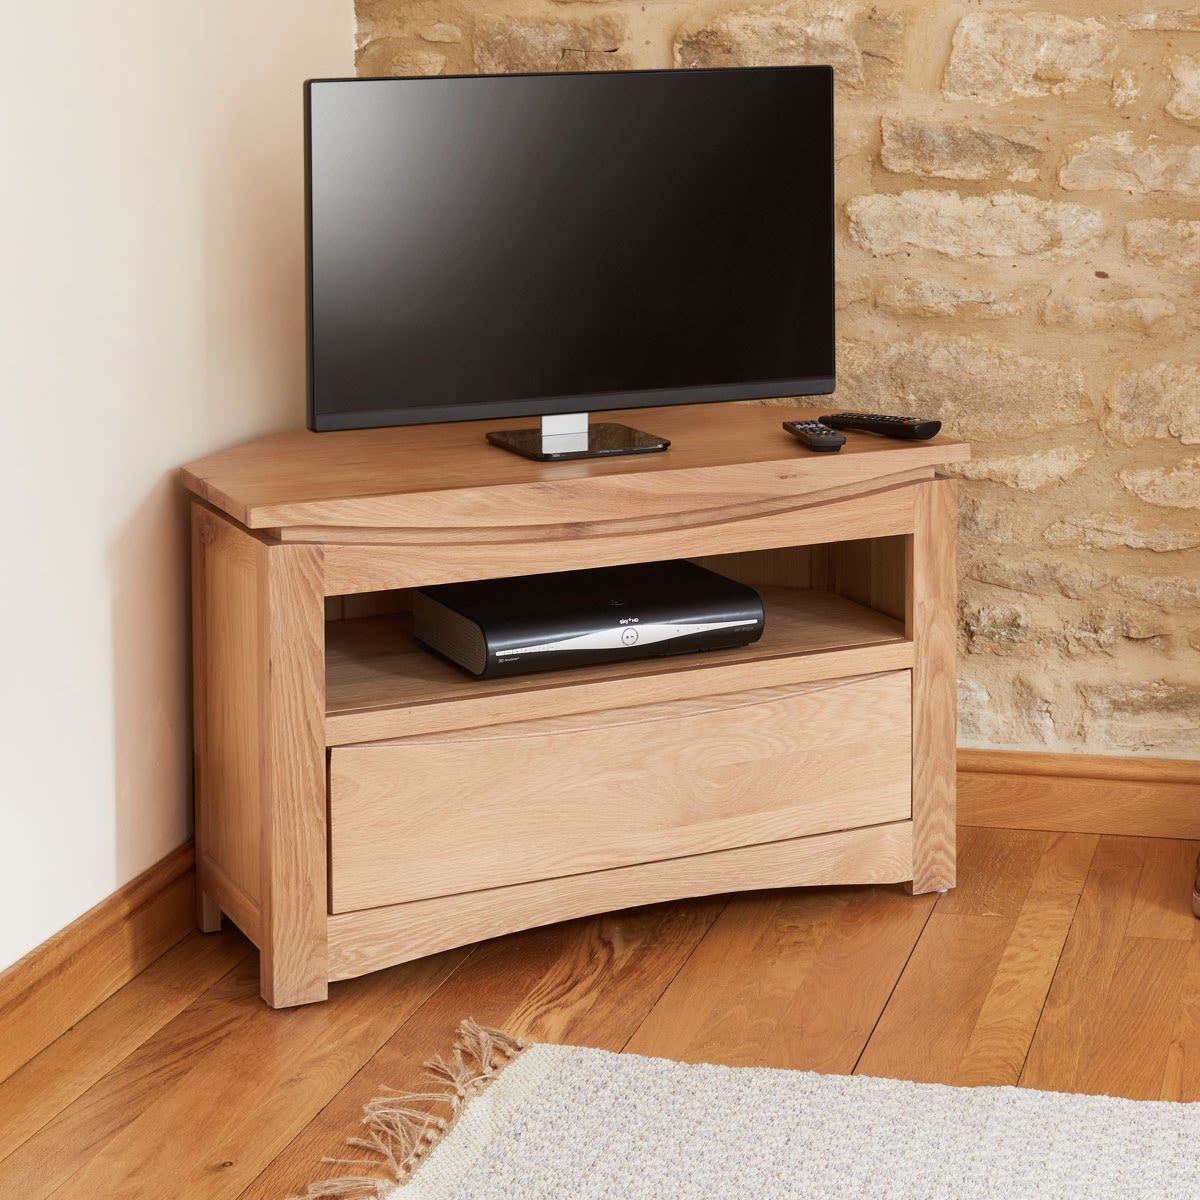 Roscoe Contemporary Oak Corner Television Cabinet | Wooden For Oak Corner Tv Stands (View 5 of 28)